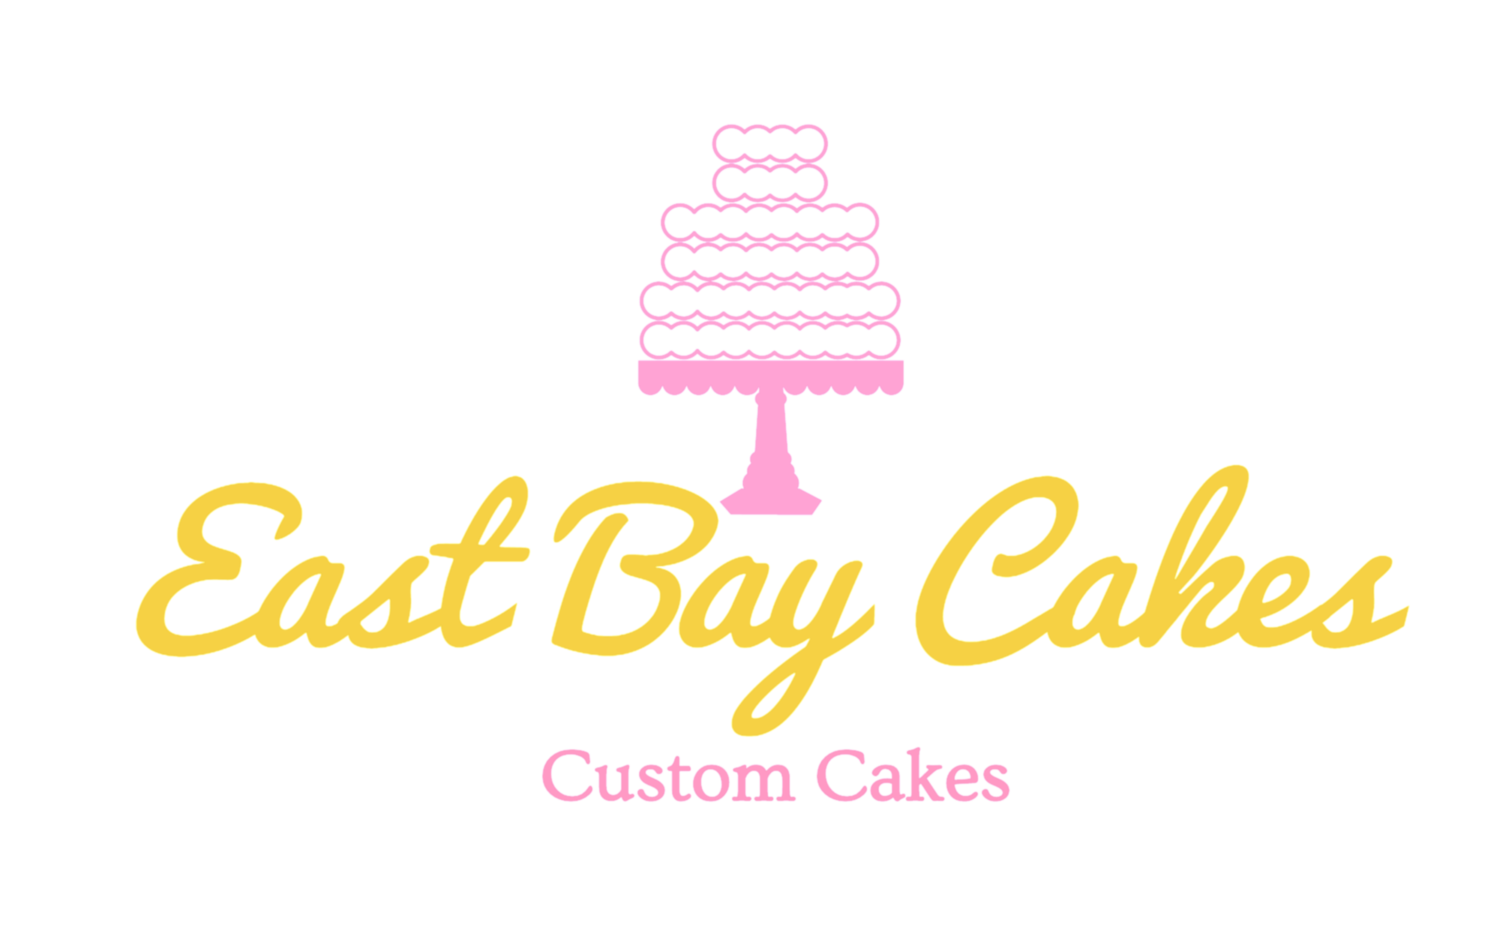 East Bay Cakes